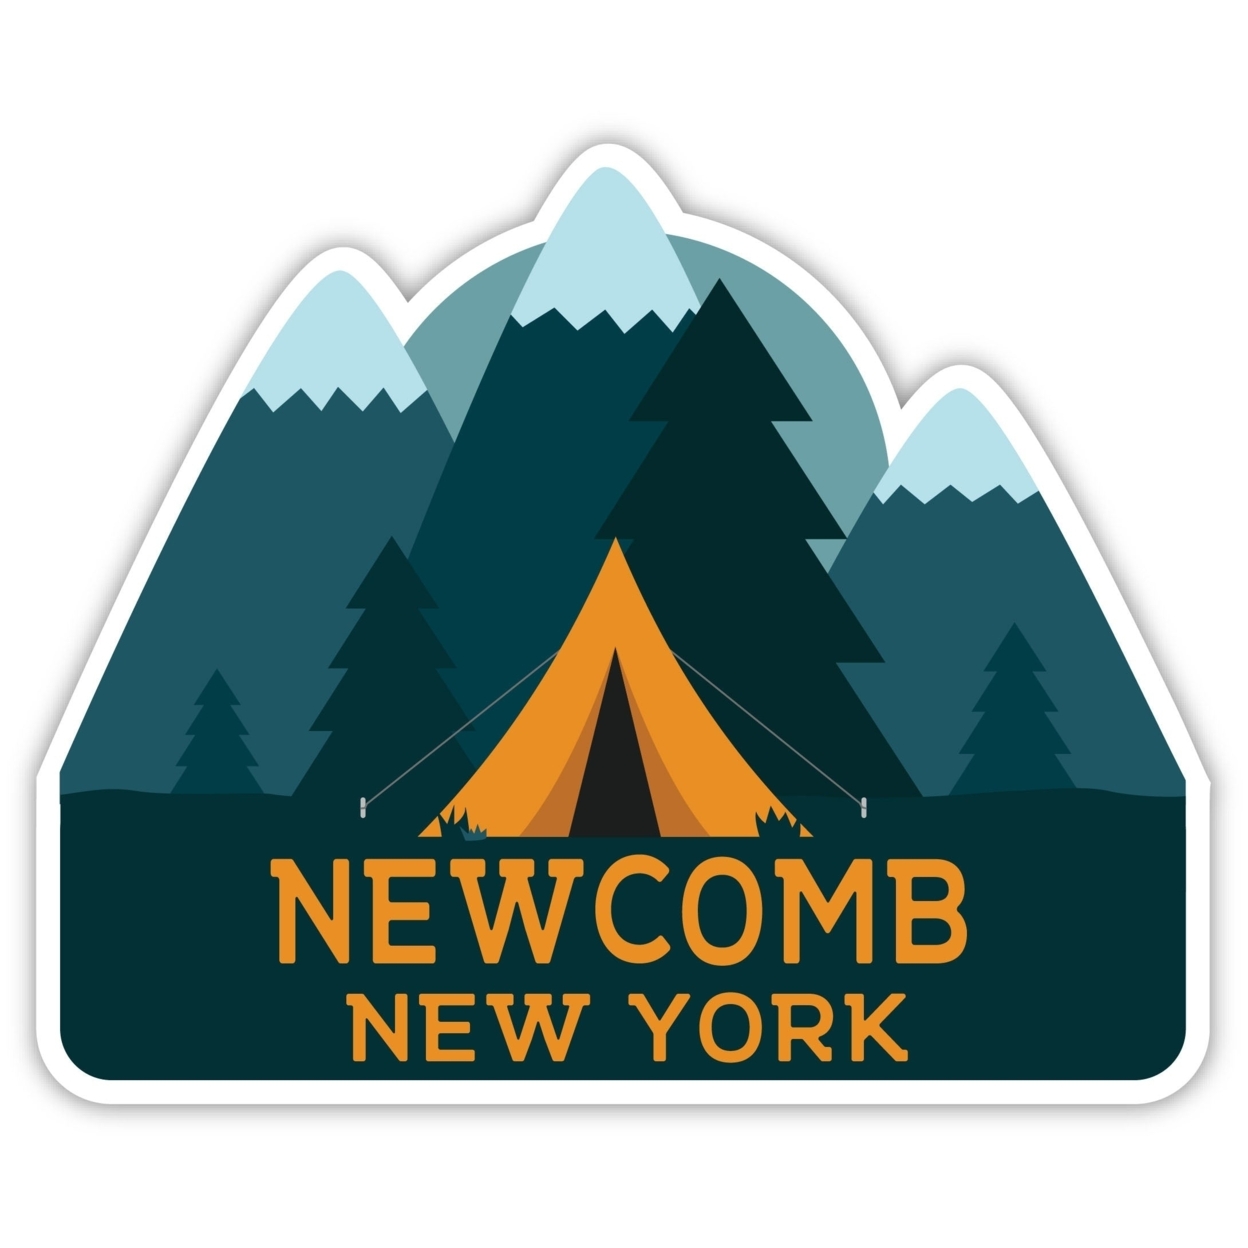 Newcomb New York Souvenir Decorative Stickers (Choose Theme And Size) - Single Unit, 4-Inch, Tent